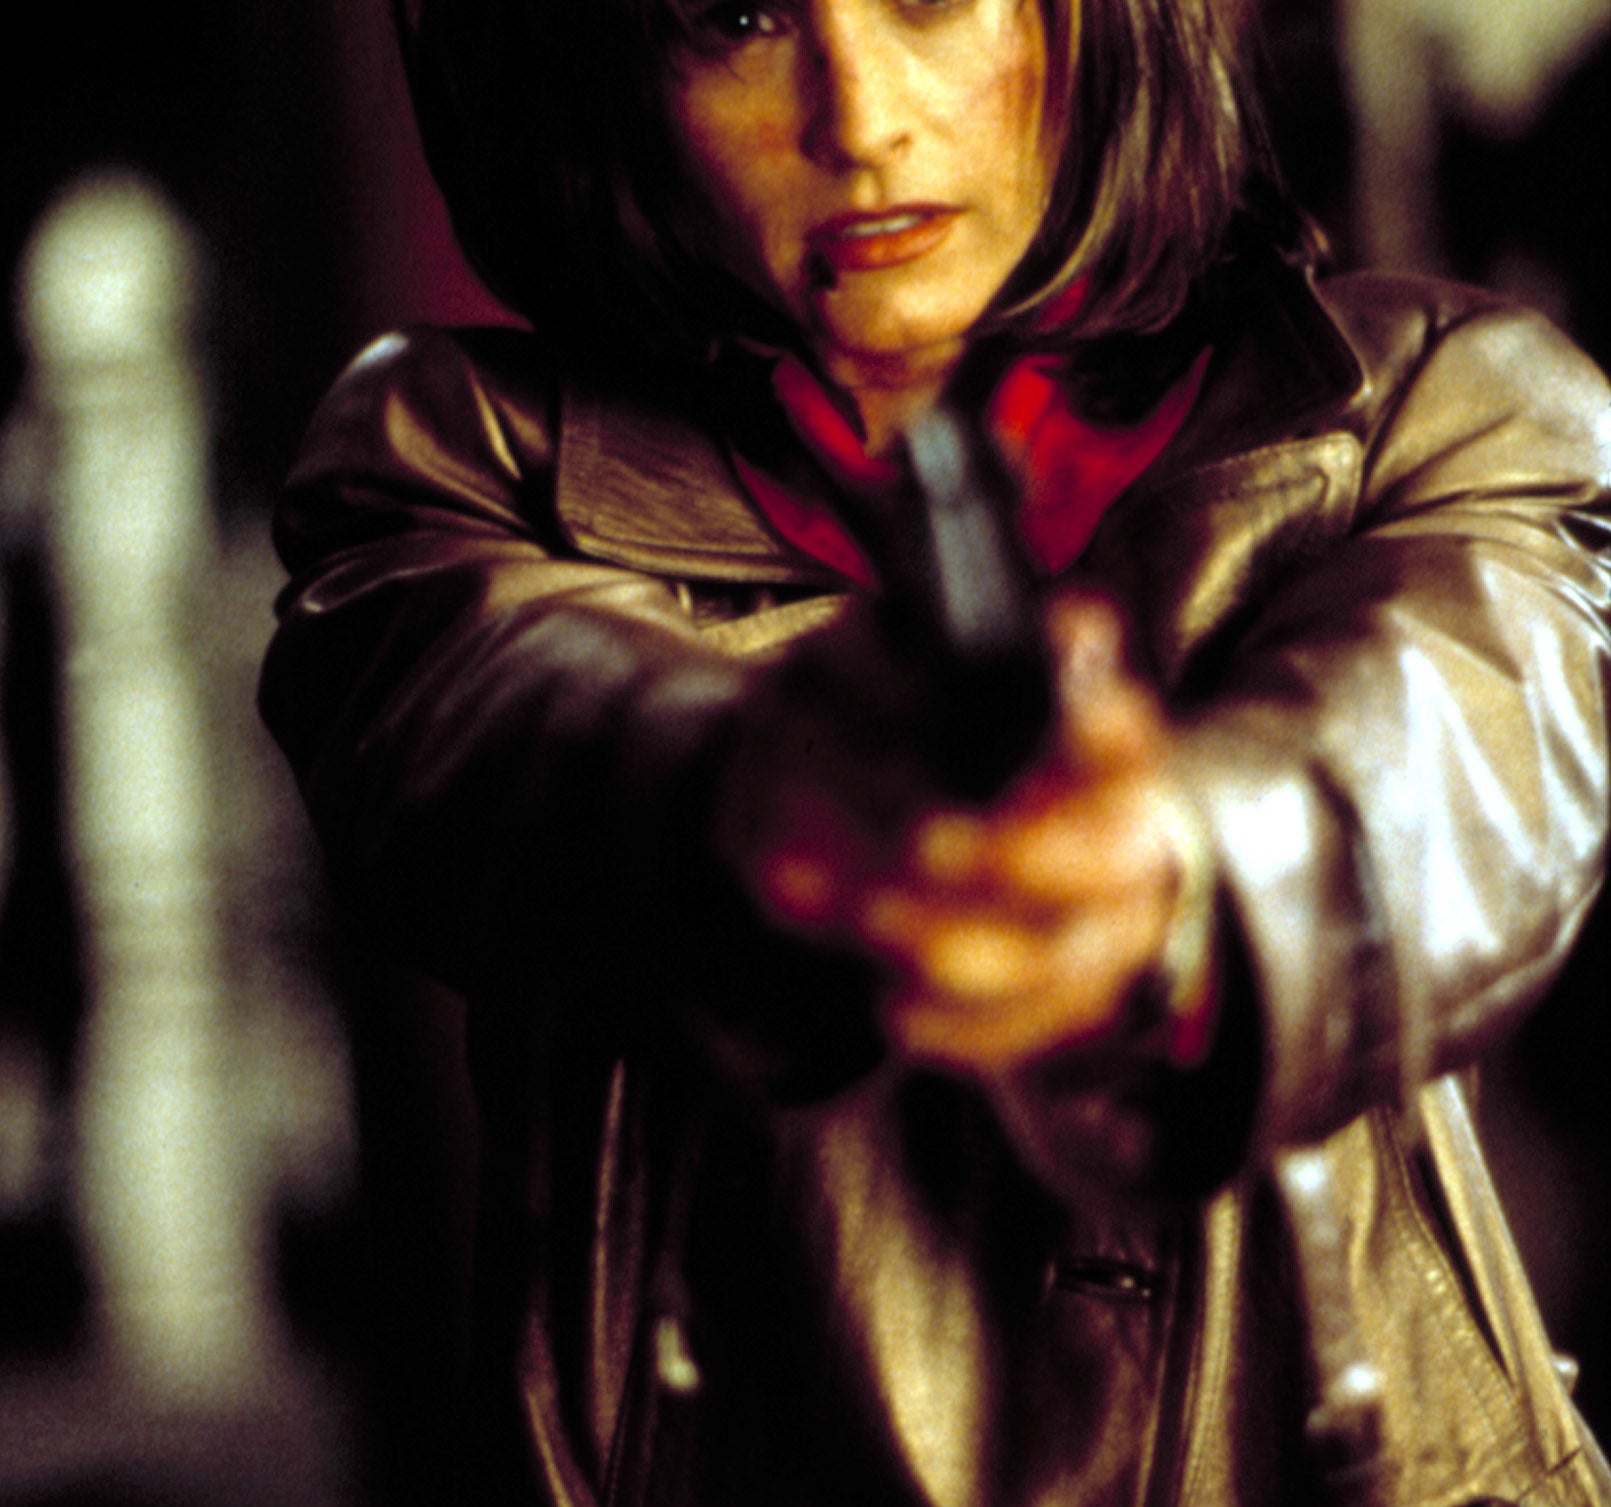 Gale Weathers pointing a gun at the killer